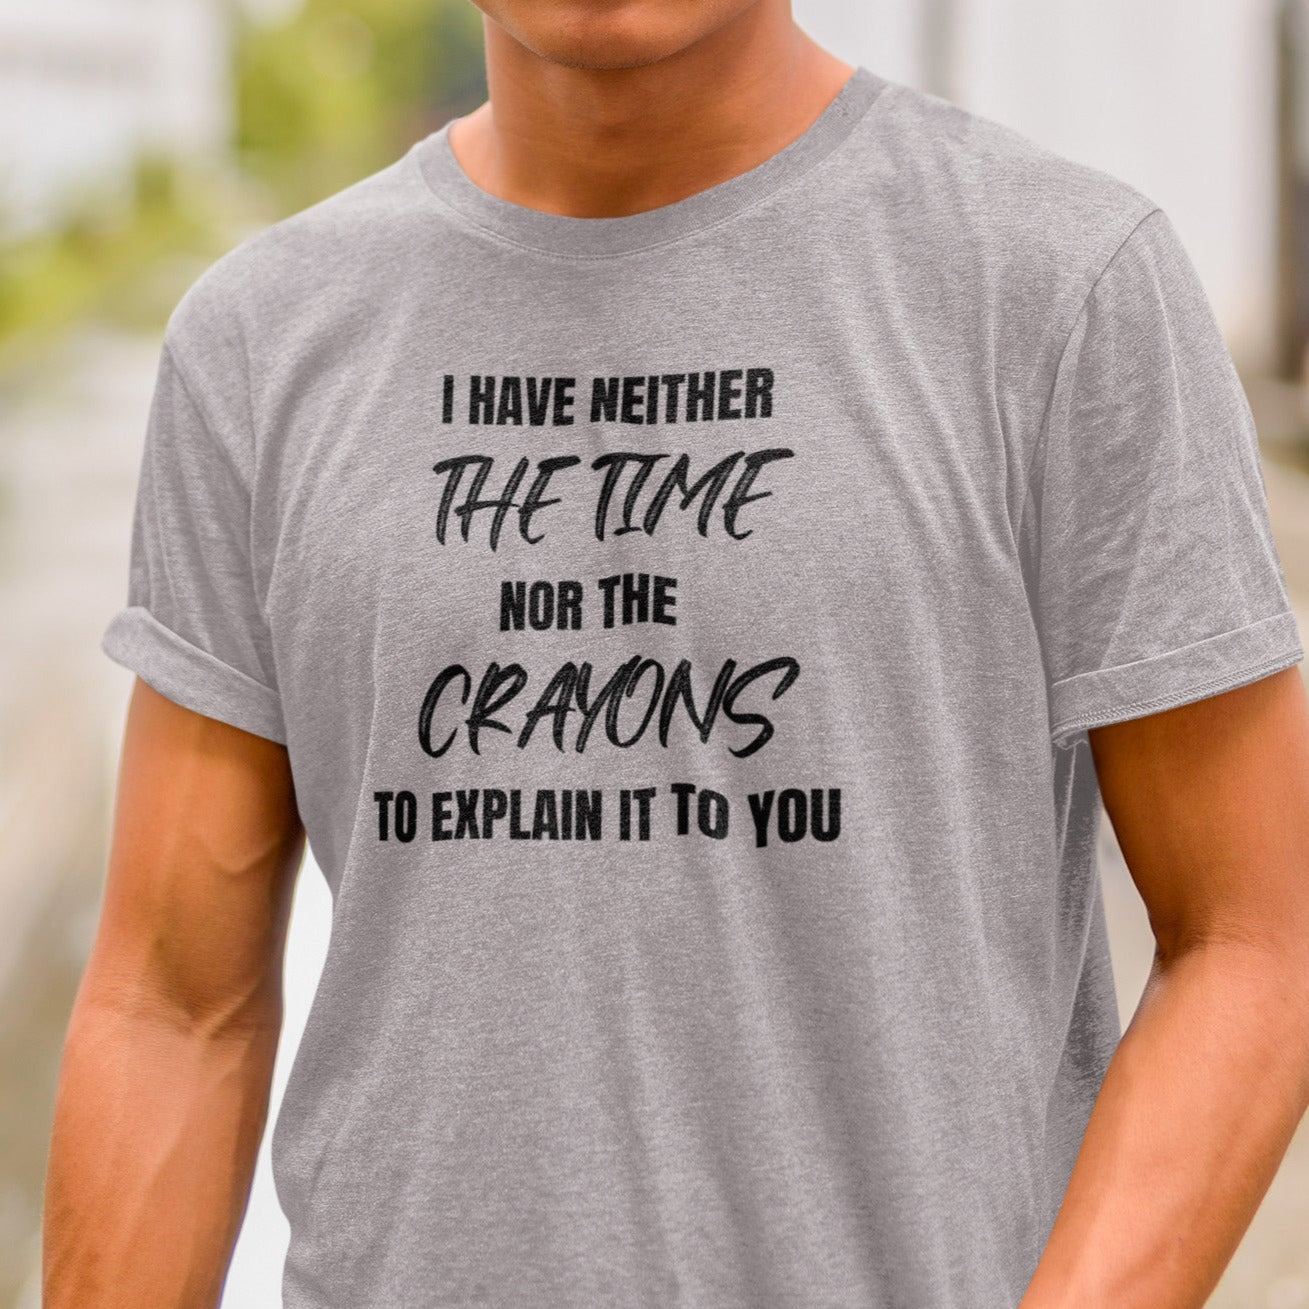 i-have-neither-the-time-nor-the-crayons-to-explain-it-to-you-athletic-heather-t-shirt-unisex-mockup-featuring-a-serious-man-posing